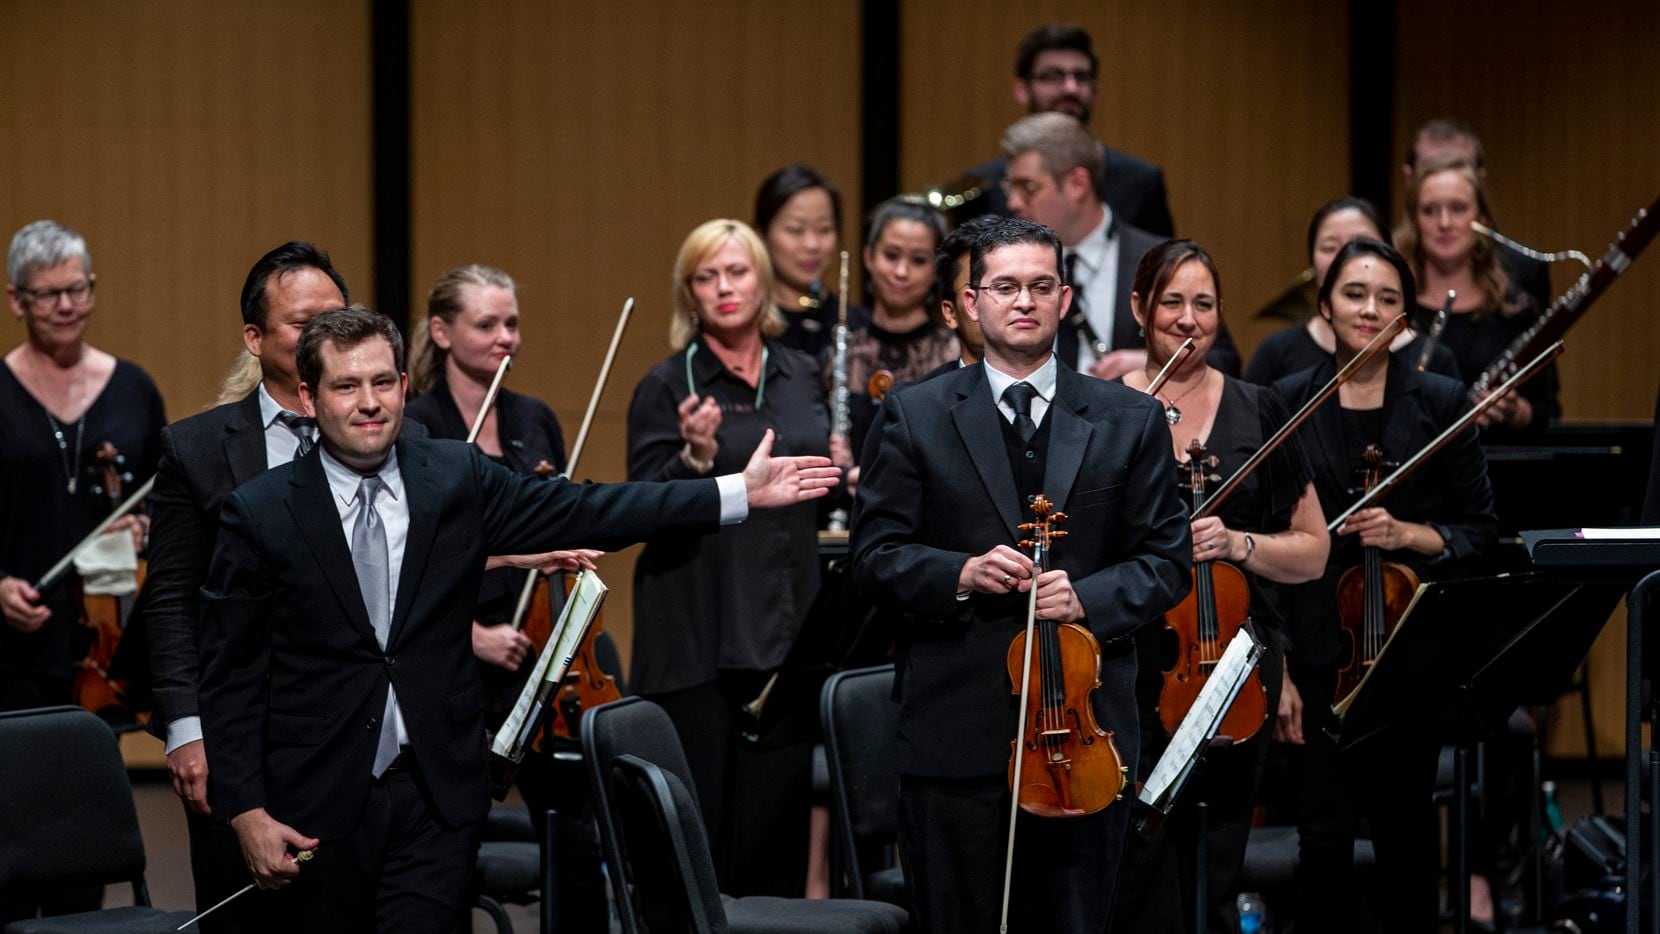 Conductor Richard McKay (left) directs the audiences applause towards violinist Simon Gollo...